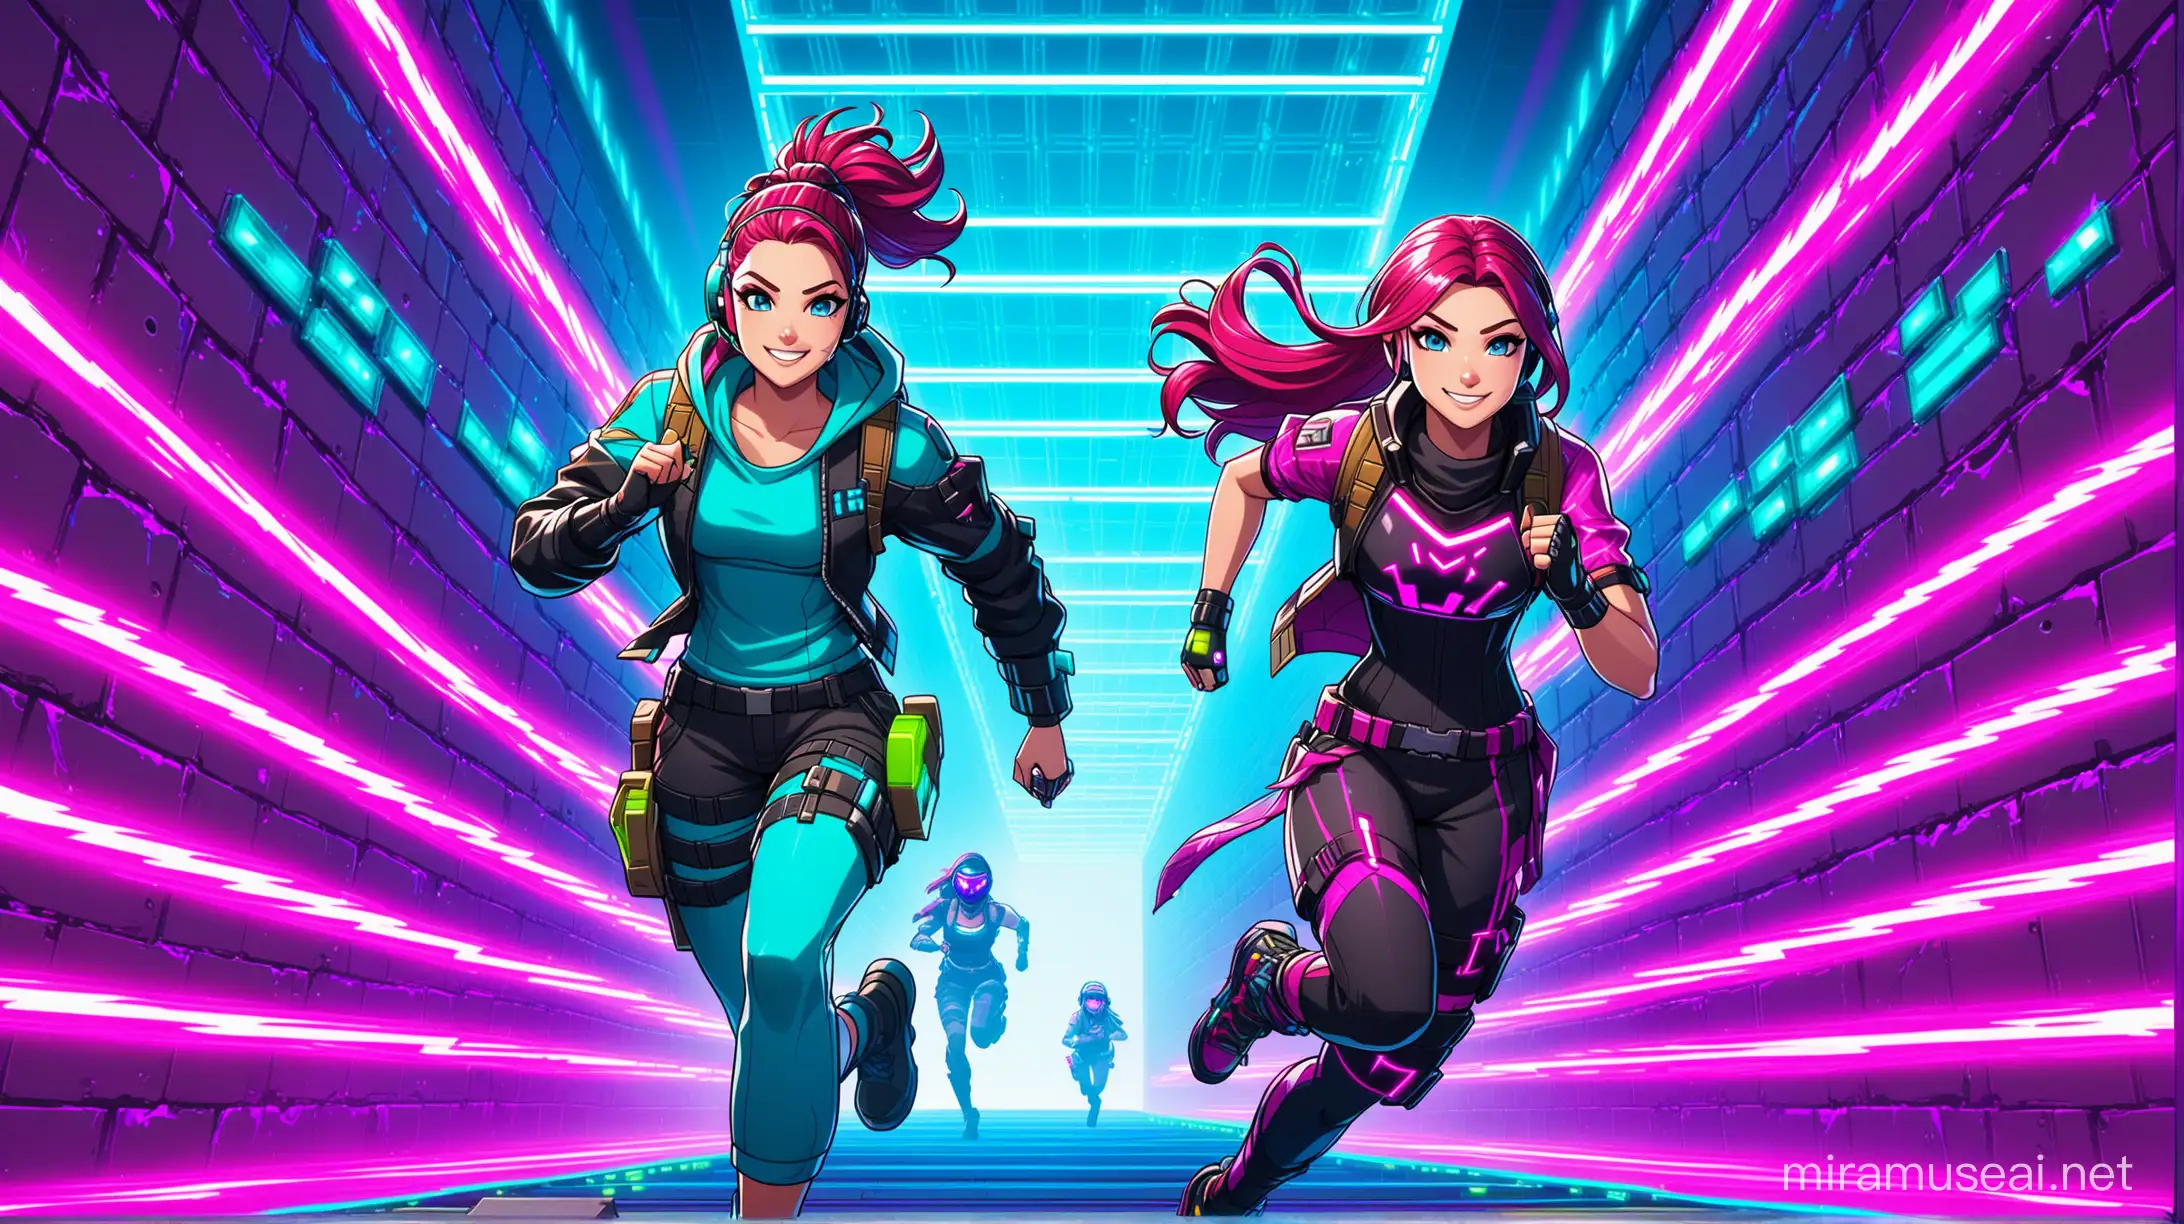 two colorful Fortnite characters named Rick and Anna and they are smiling and are running an obstacle course. the theme is cyberpunk with neon and metal walls